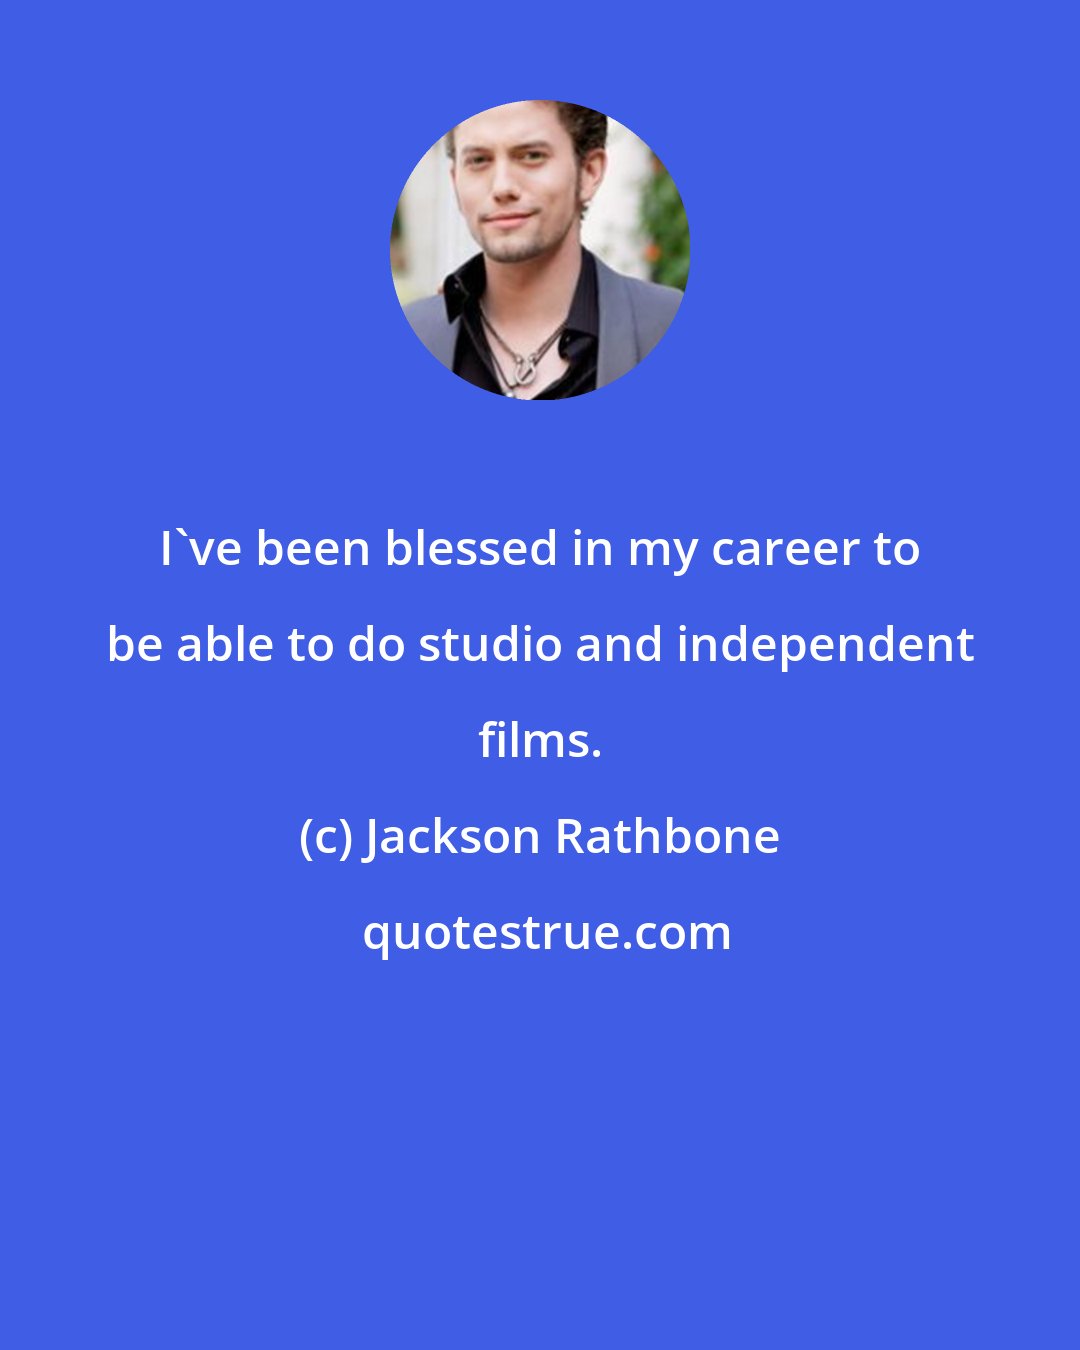 Jackson Rathbone: I've been blessed in my career to be able to do studio and independent films.